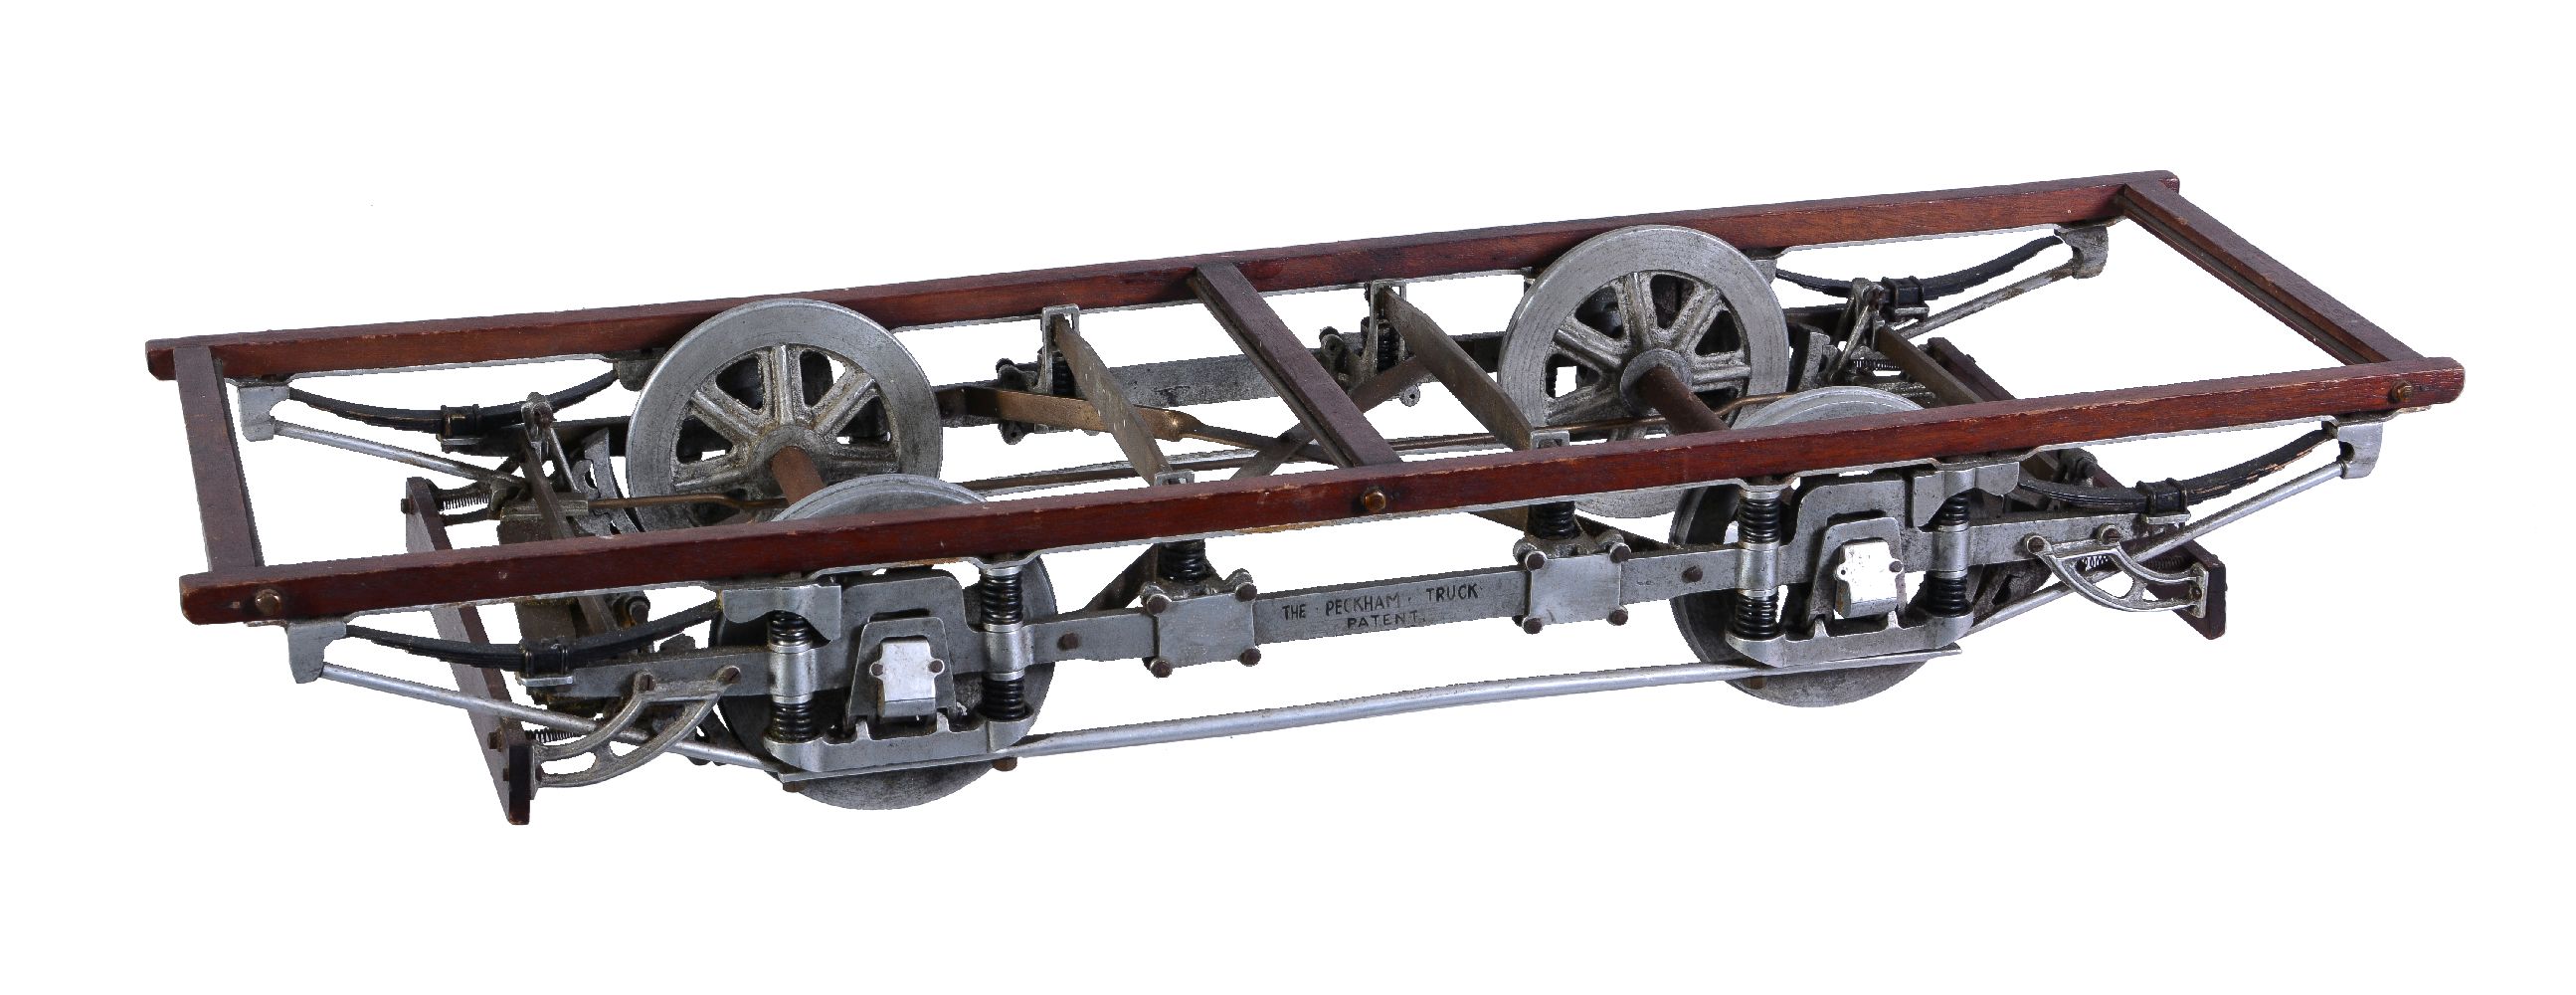 A patent model of ‘The Peckham Truck’ chassis - Image 3 of 3